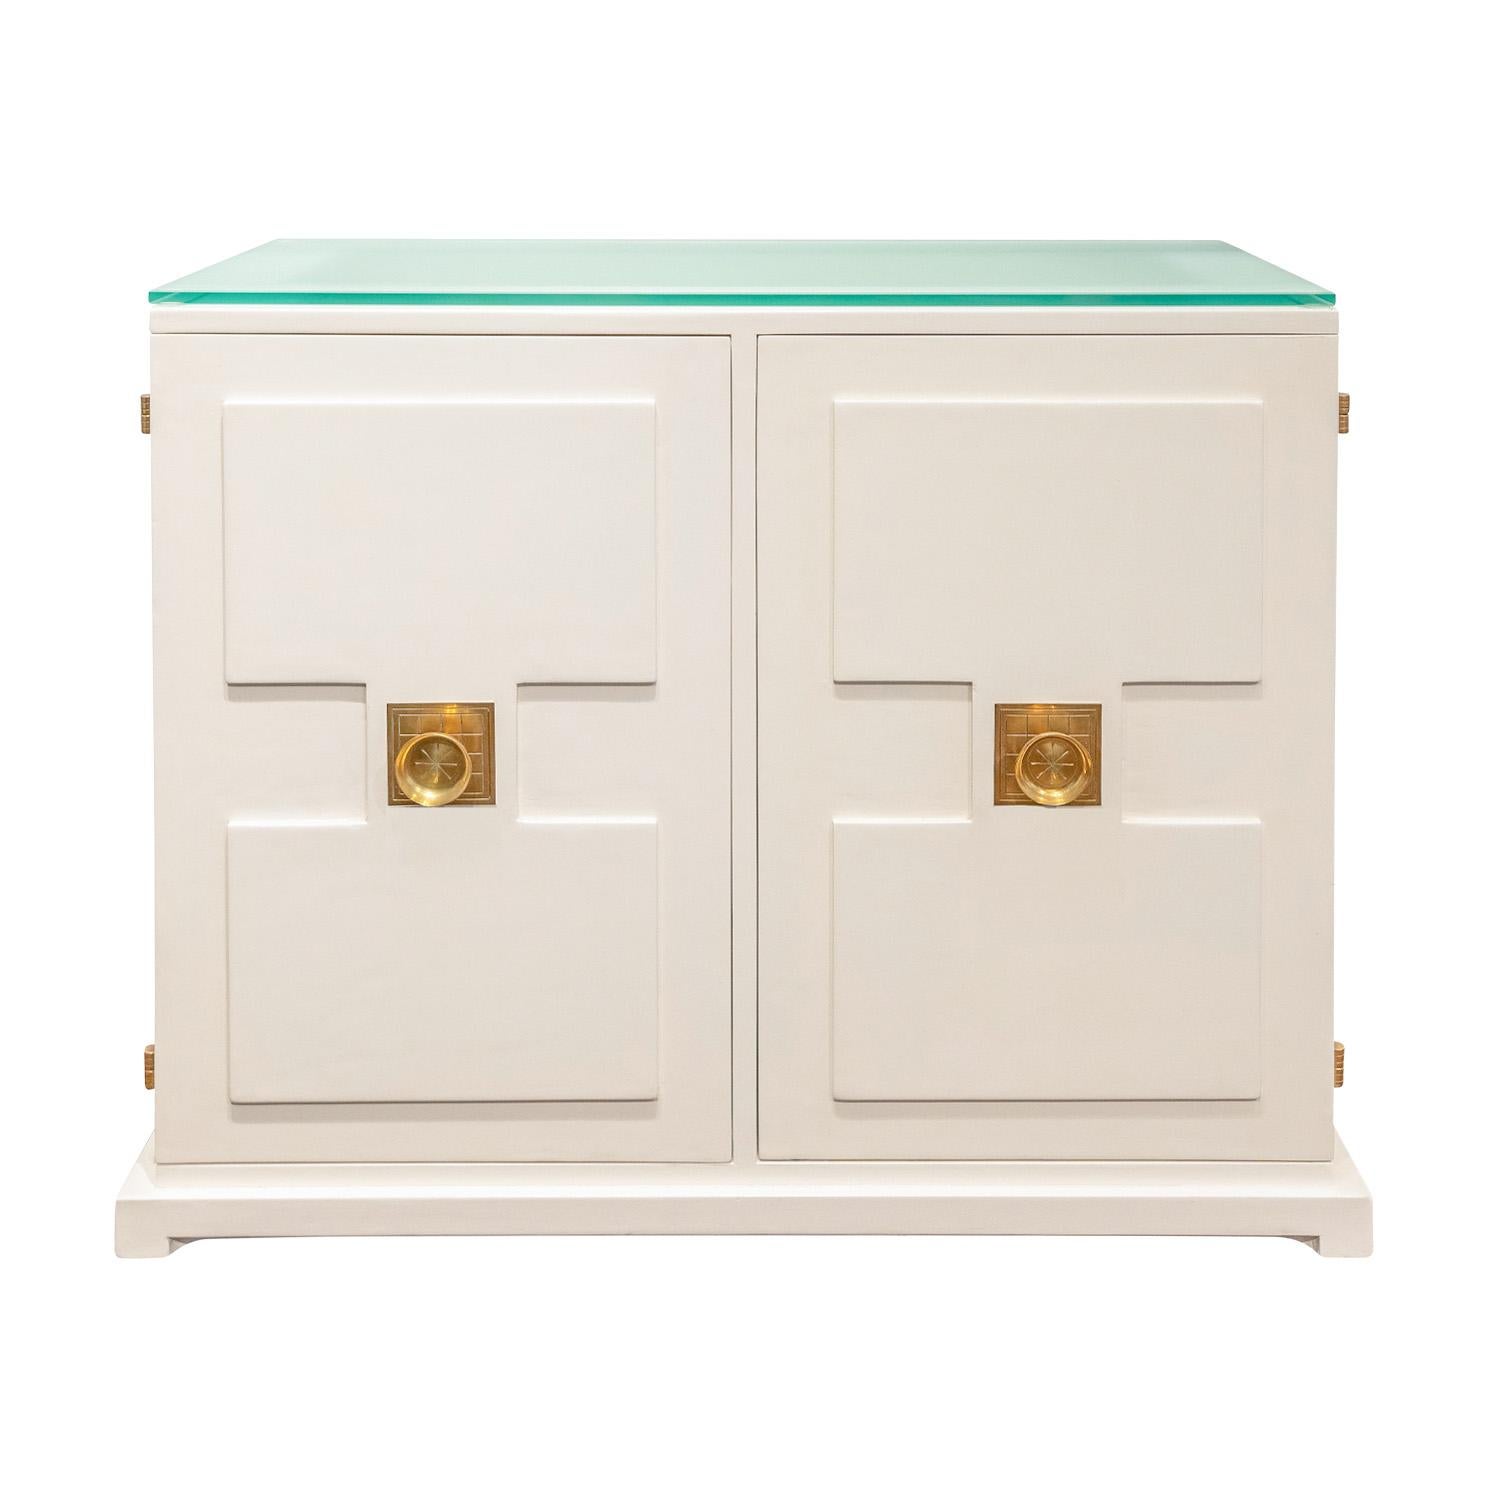 2 Door cabinet with sculpted doors and sides with geometric motif with iconic etched brass pulls and hinges, and illuminating glass top by Tommi Parzinger for Parzinger Originals, American 1960’s. This is a custom order Parzinger piece with the